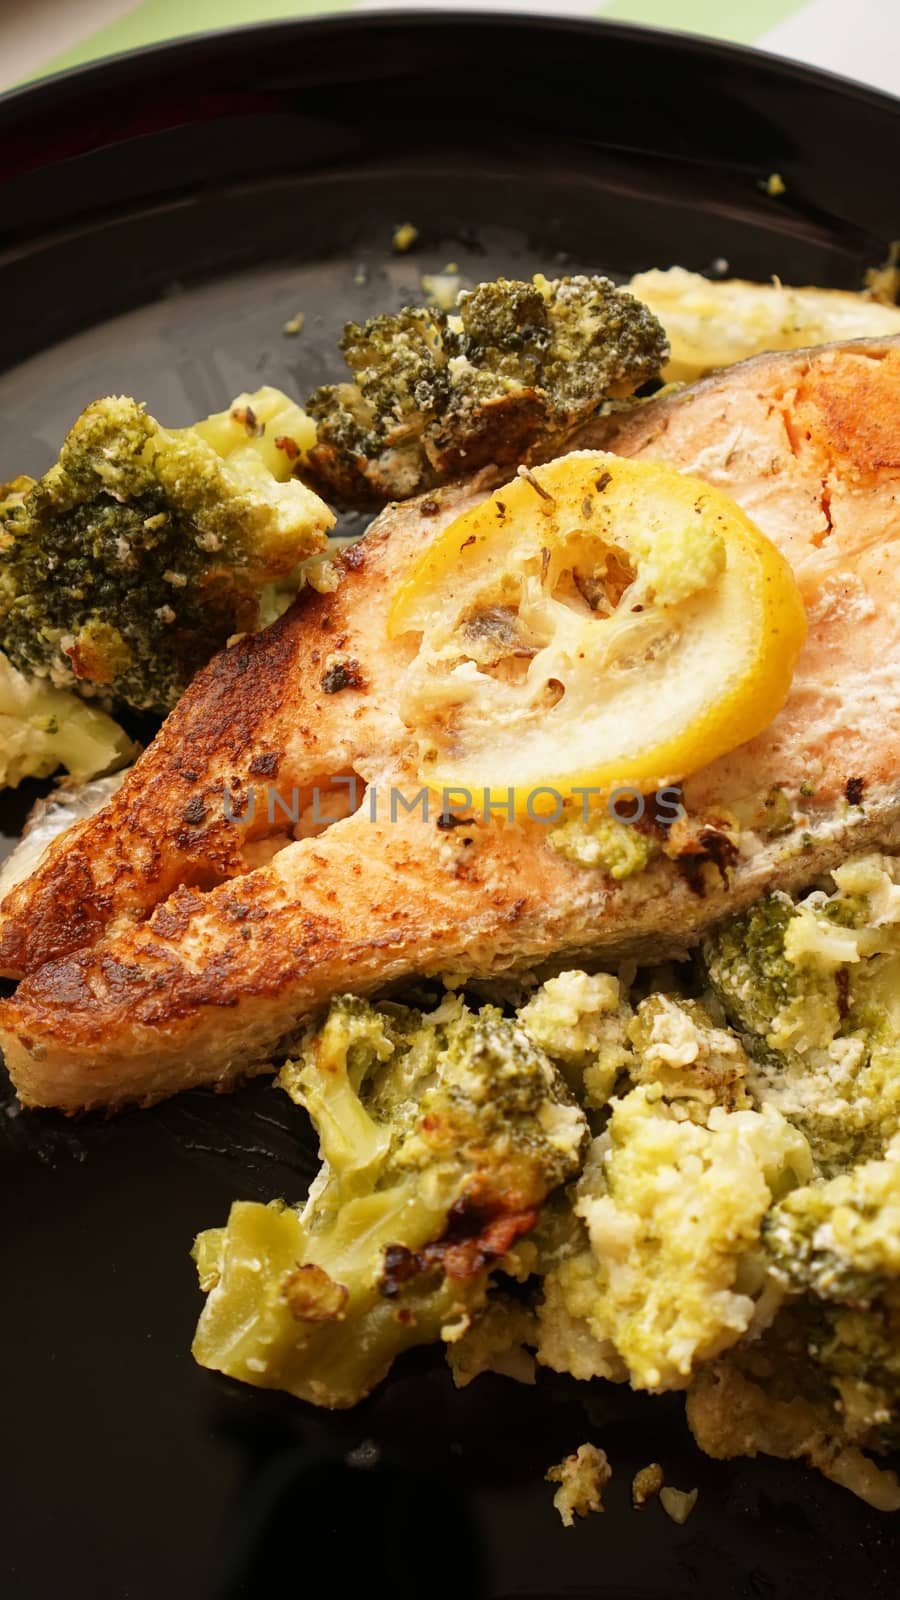 Top view of grilled salmon steak served on black plate with vegetable garnish from broccoli - vertical